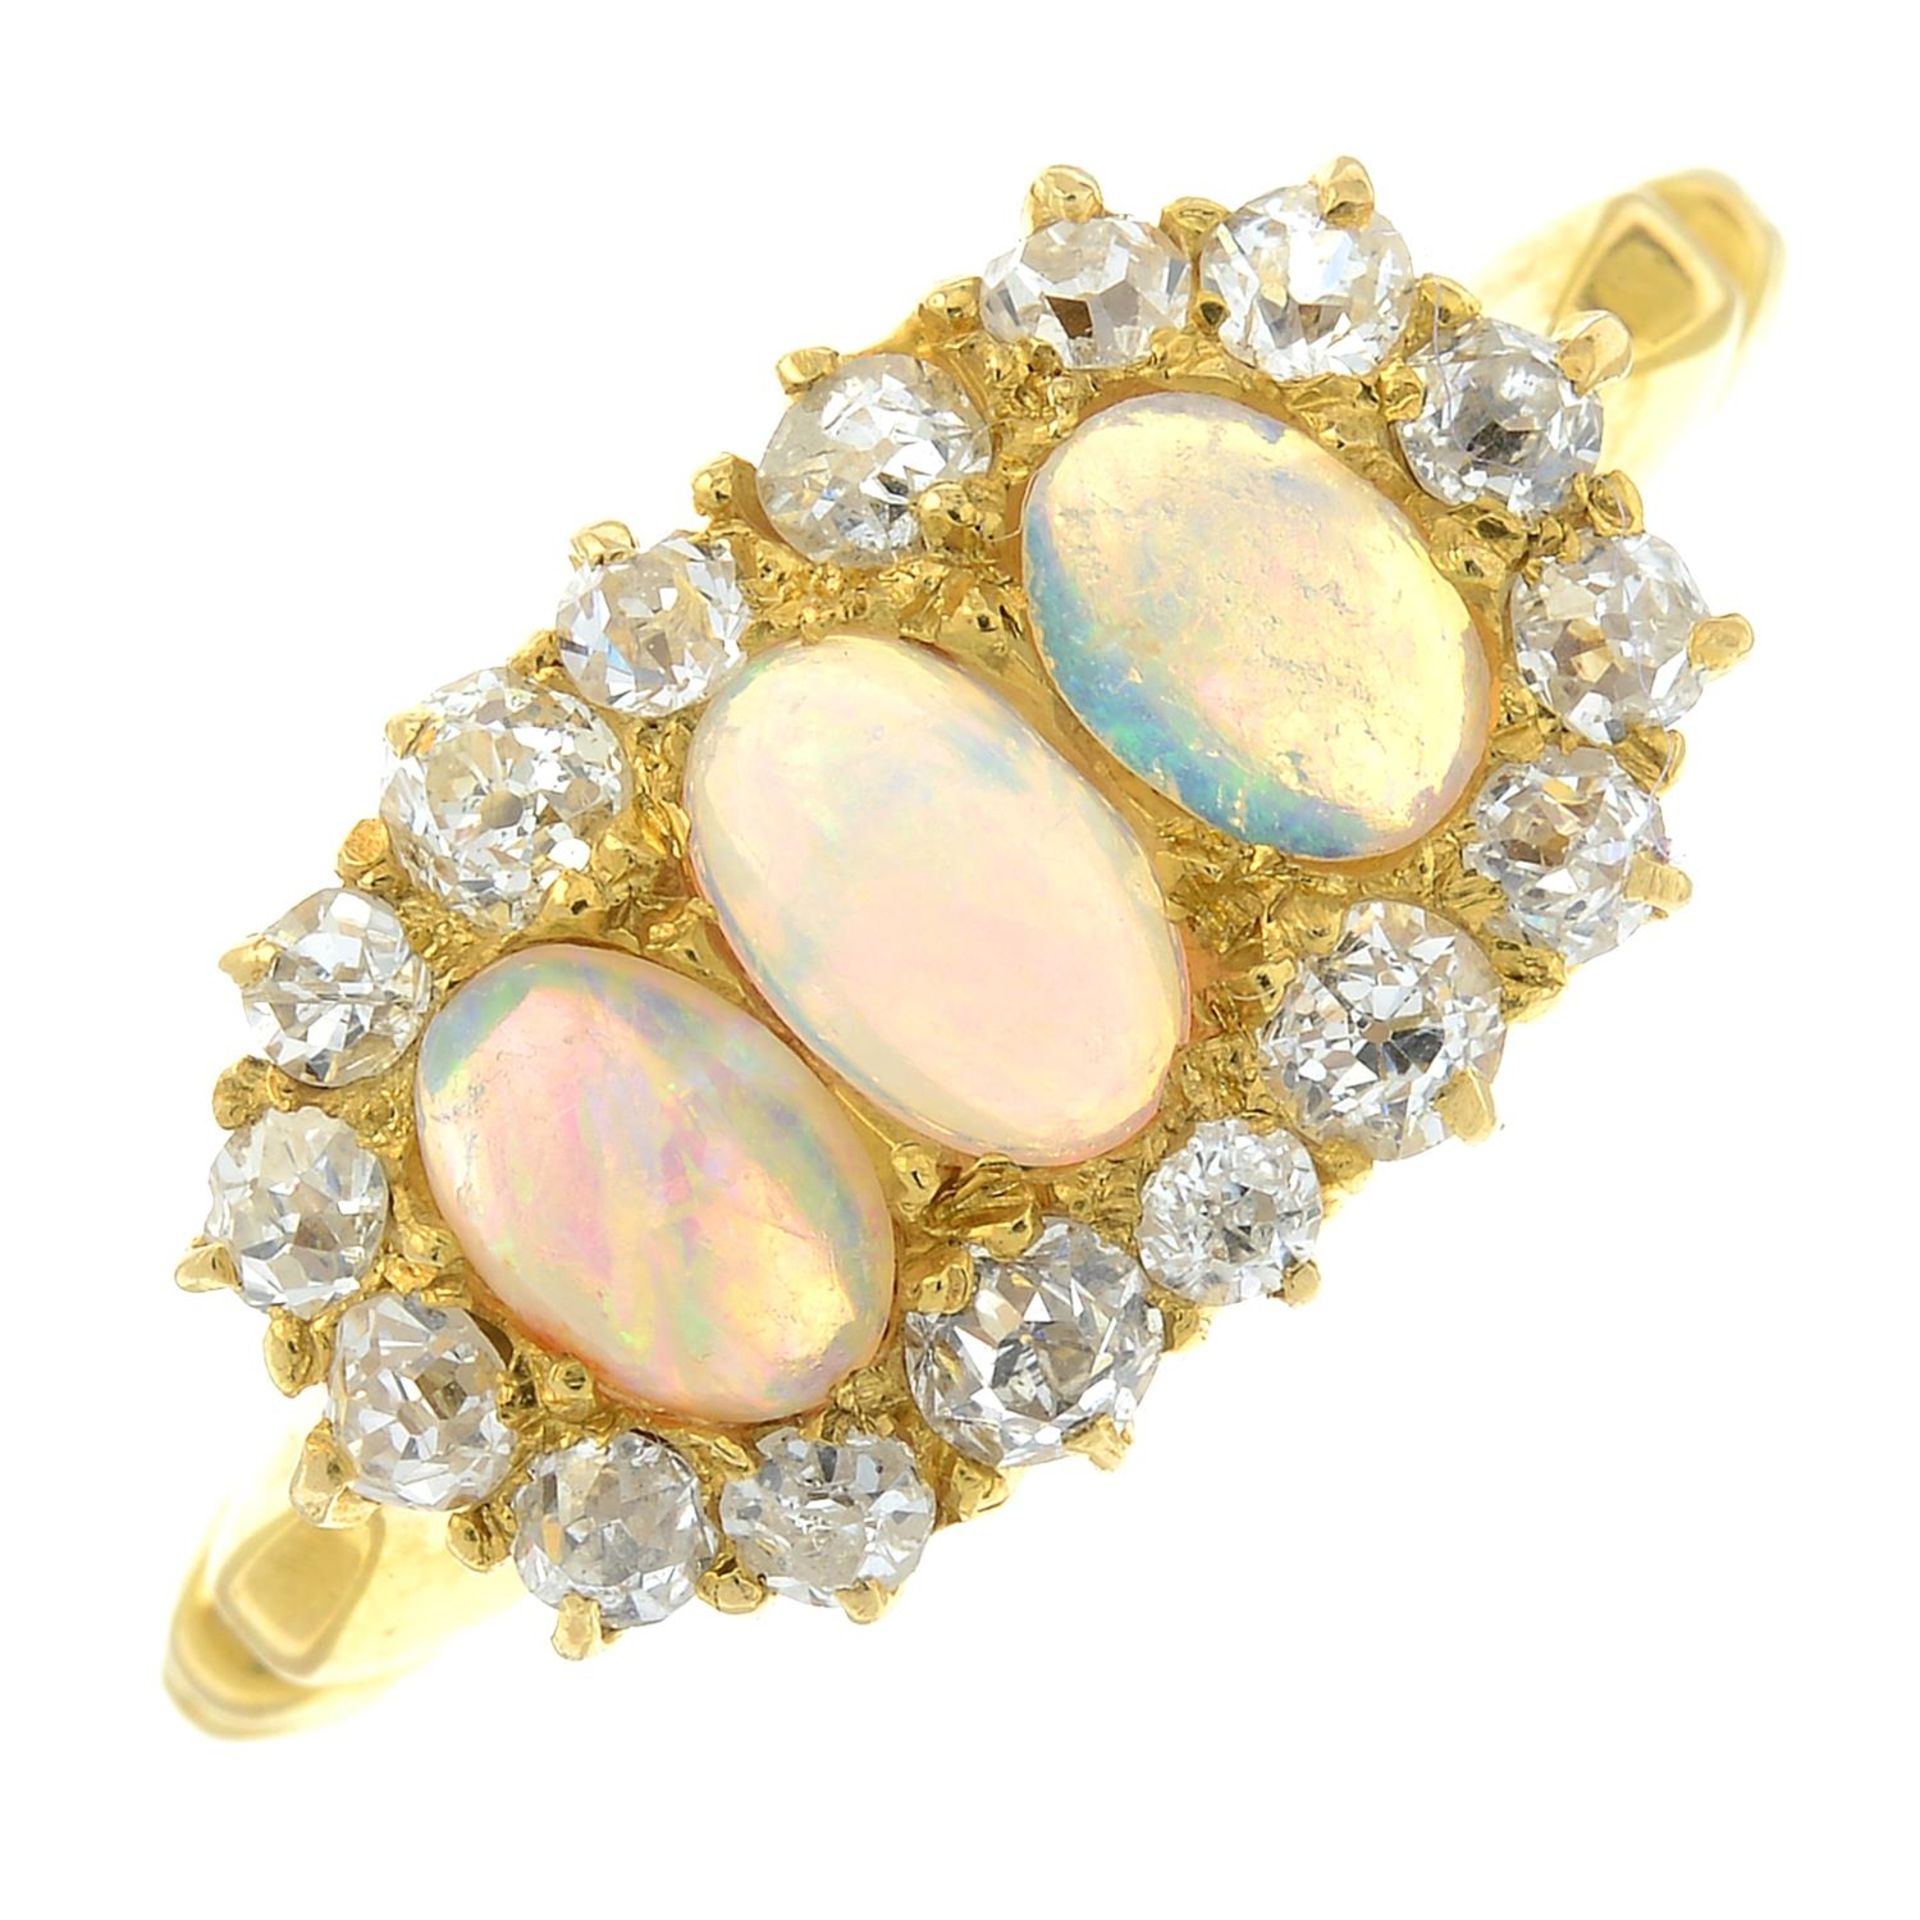 An early 20th century 18ct gold opal and old-cut diamond cluster dress ring.